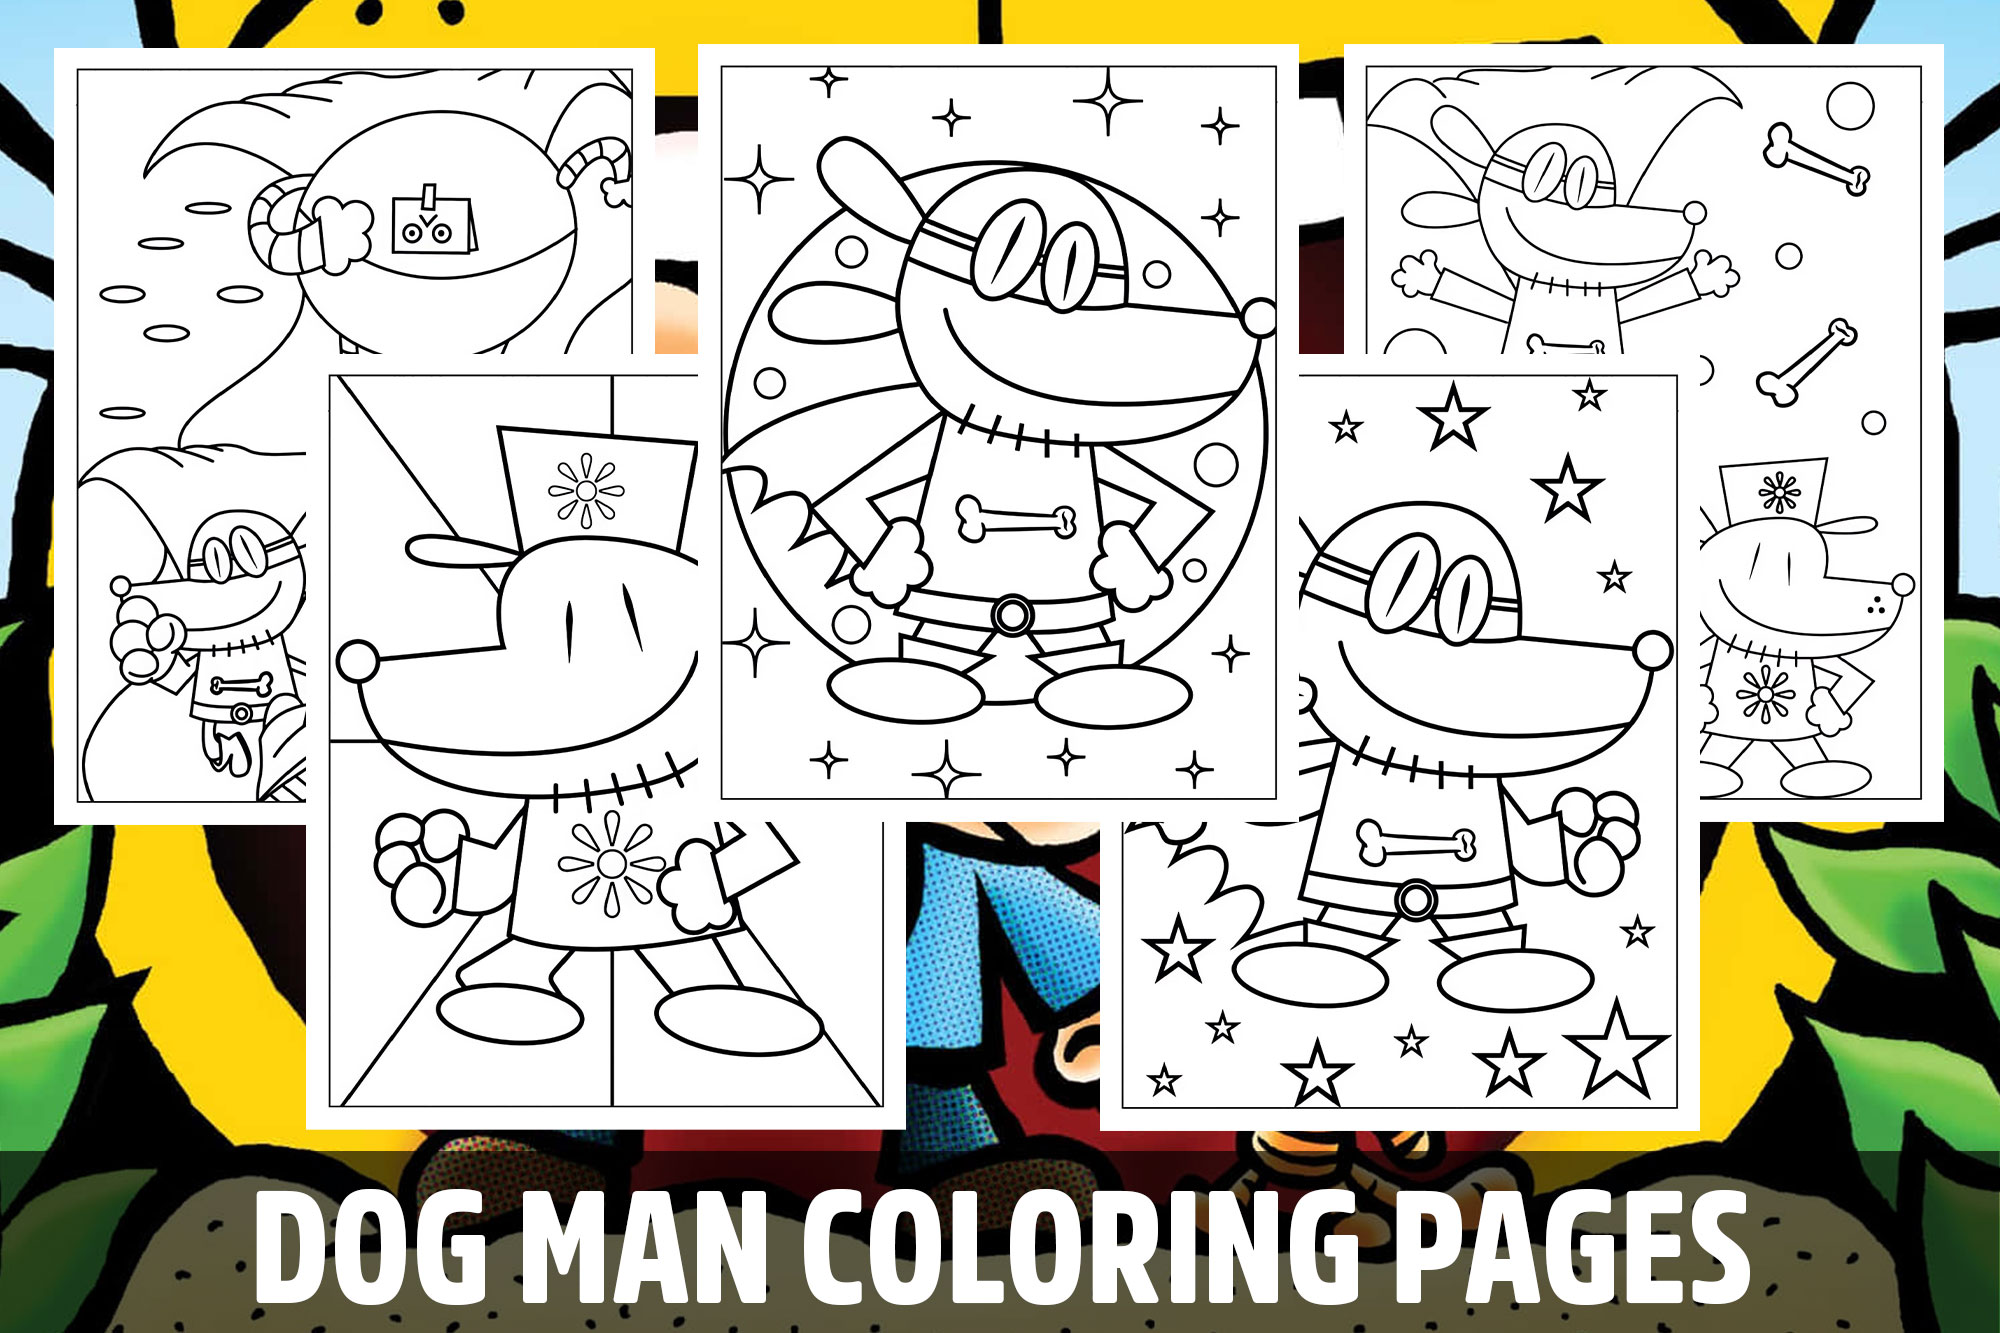 Dog man coloring pages for kids girls boys teens birthday school activity made by teachers